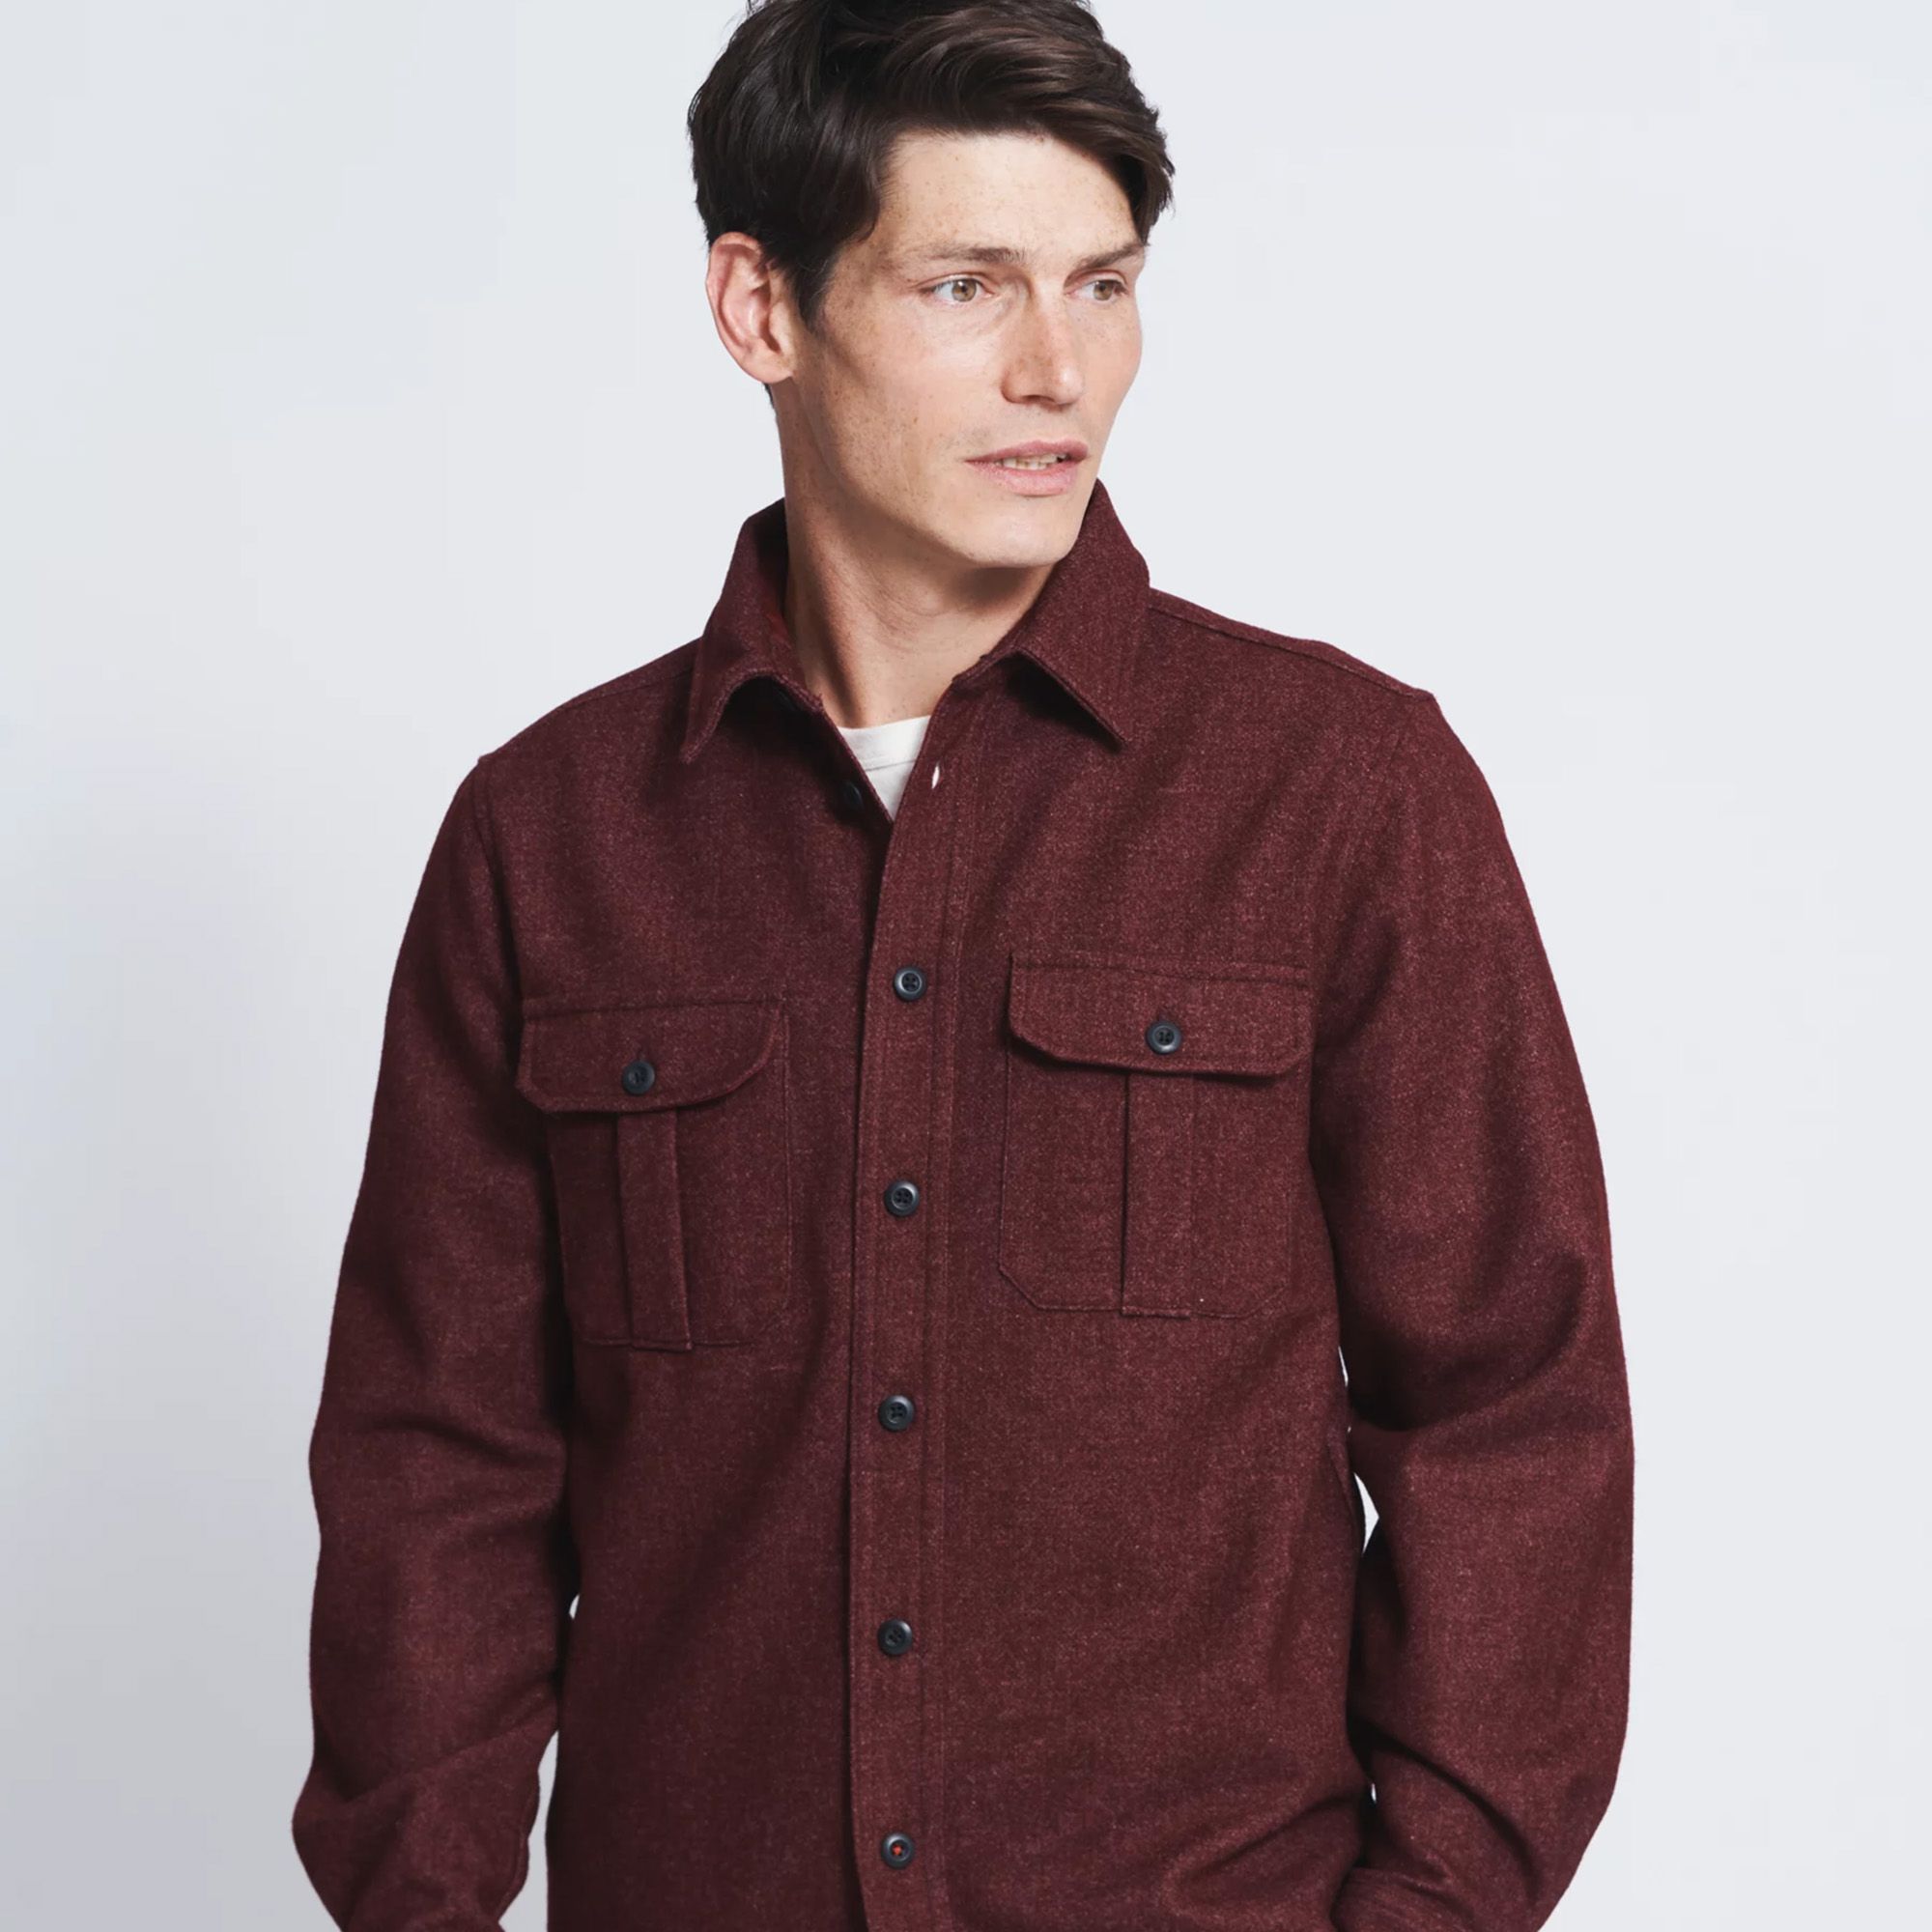 Men's Shirts Outlet, Clearance Men's Shirts